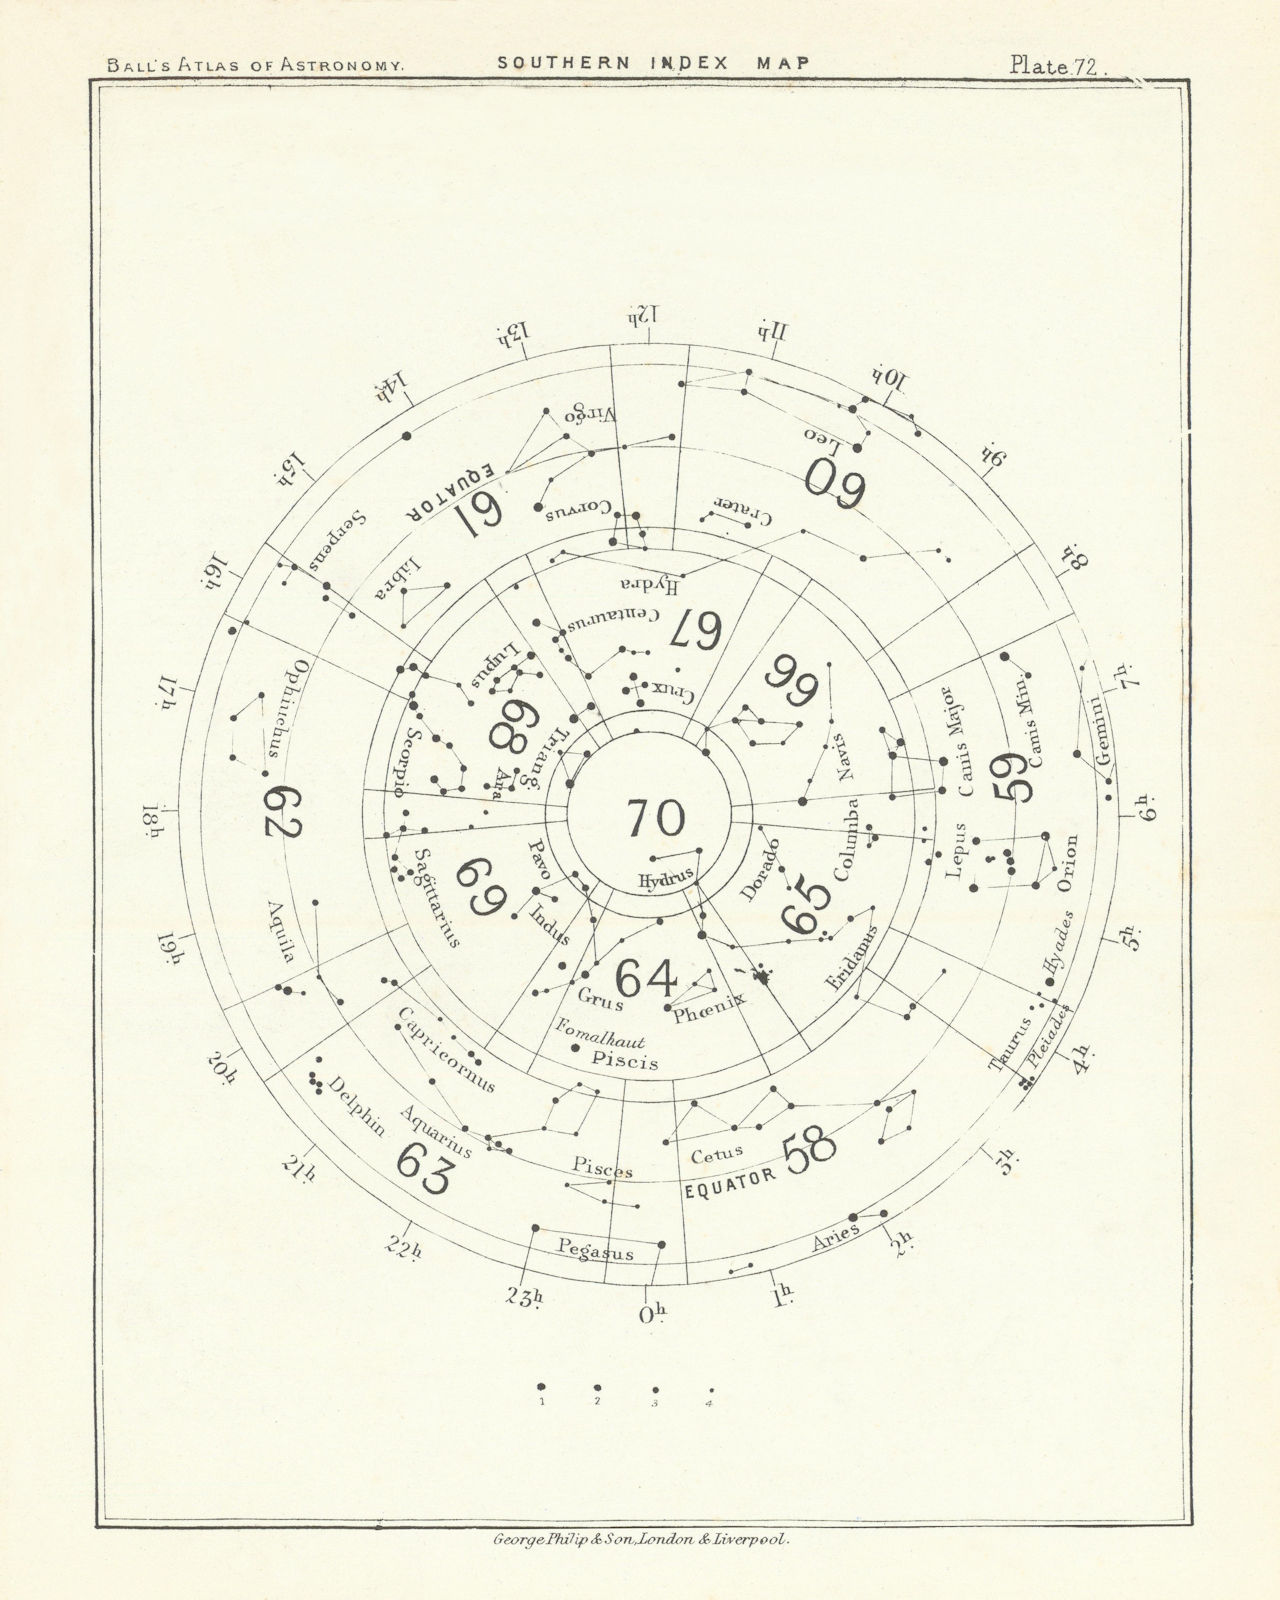 Night Sky Star Chart. Southern Index Map by Robert Ball. Astronomy 1892